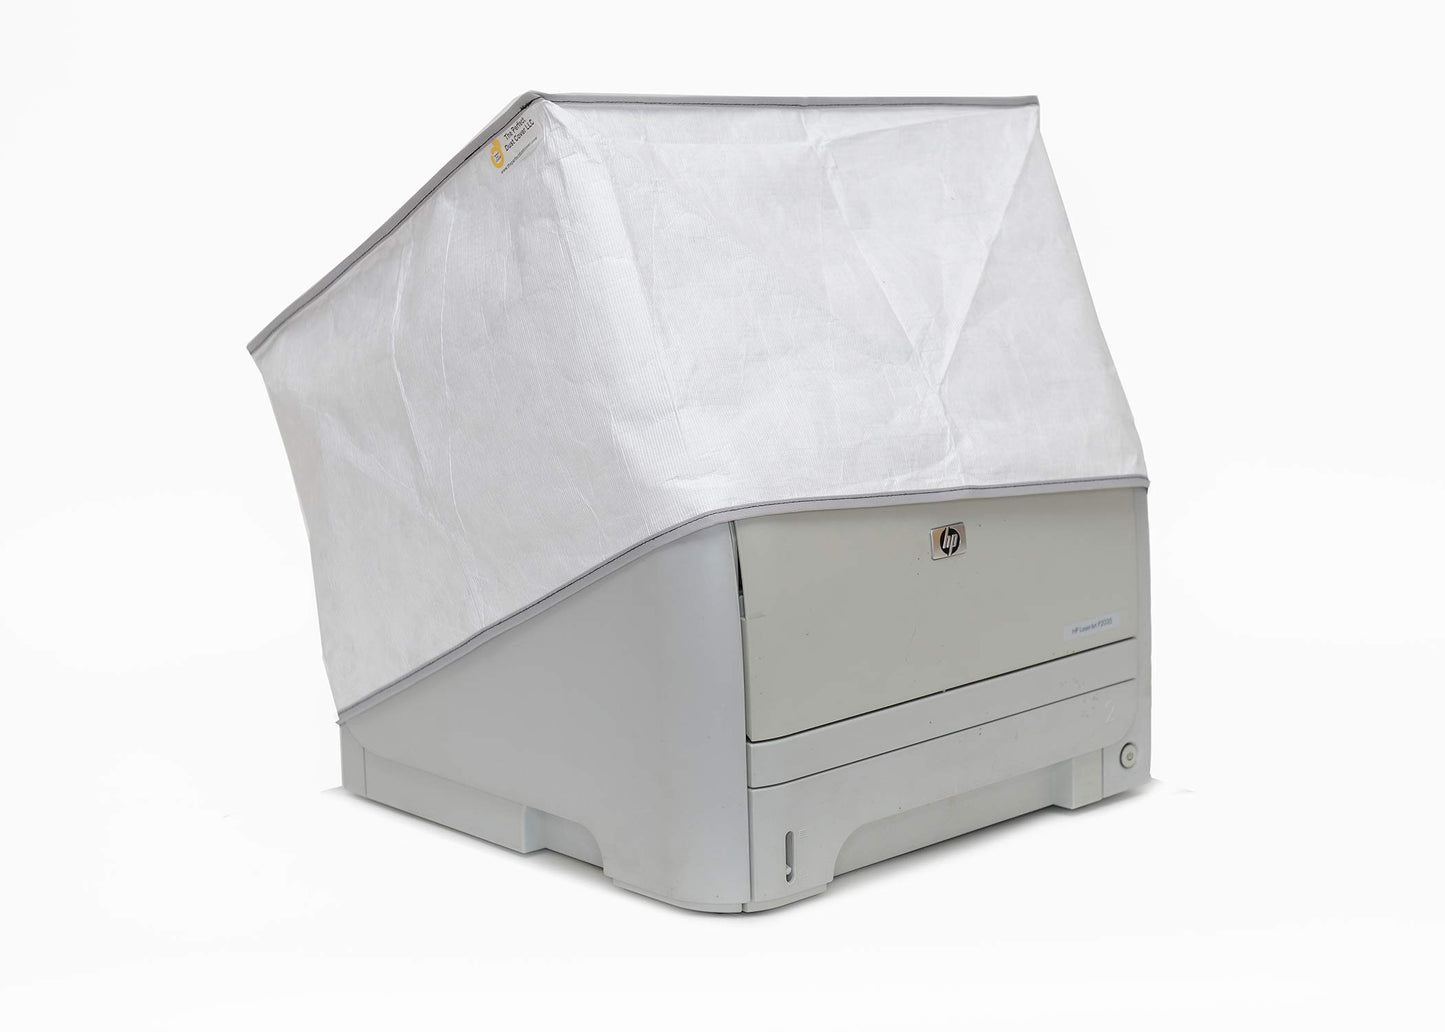 The Perfect Dust Cover, White Vinyl Cover for Canon Color ImageCLASS MF746Cdw Laser Printer, Anti Static Waterproof and Double Stitched Cover by The Perfect Dust Cover LLC